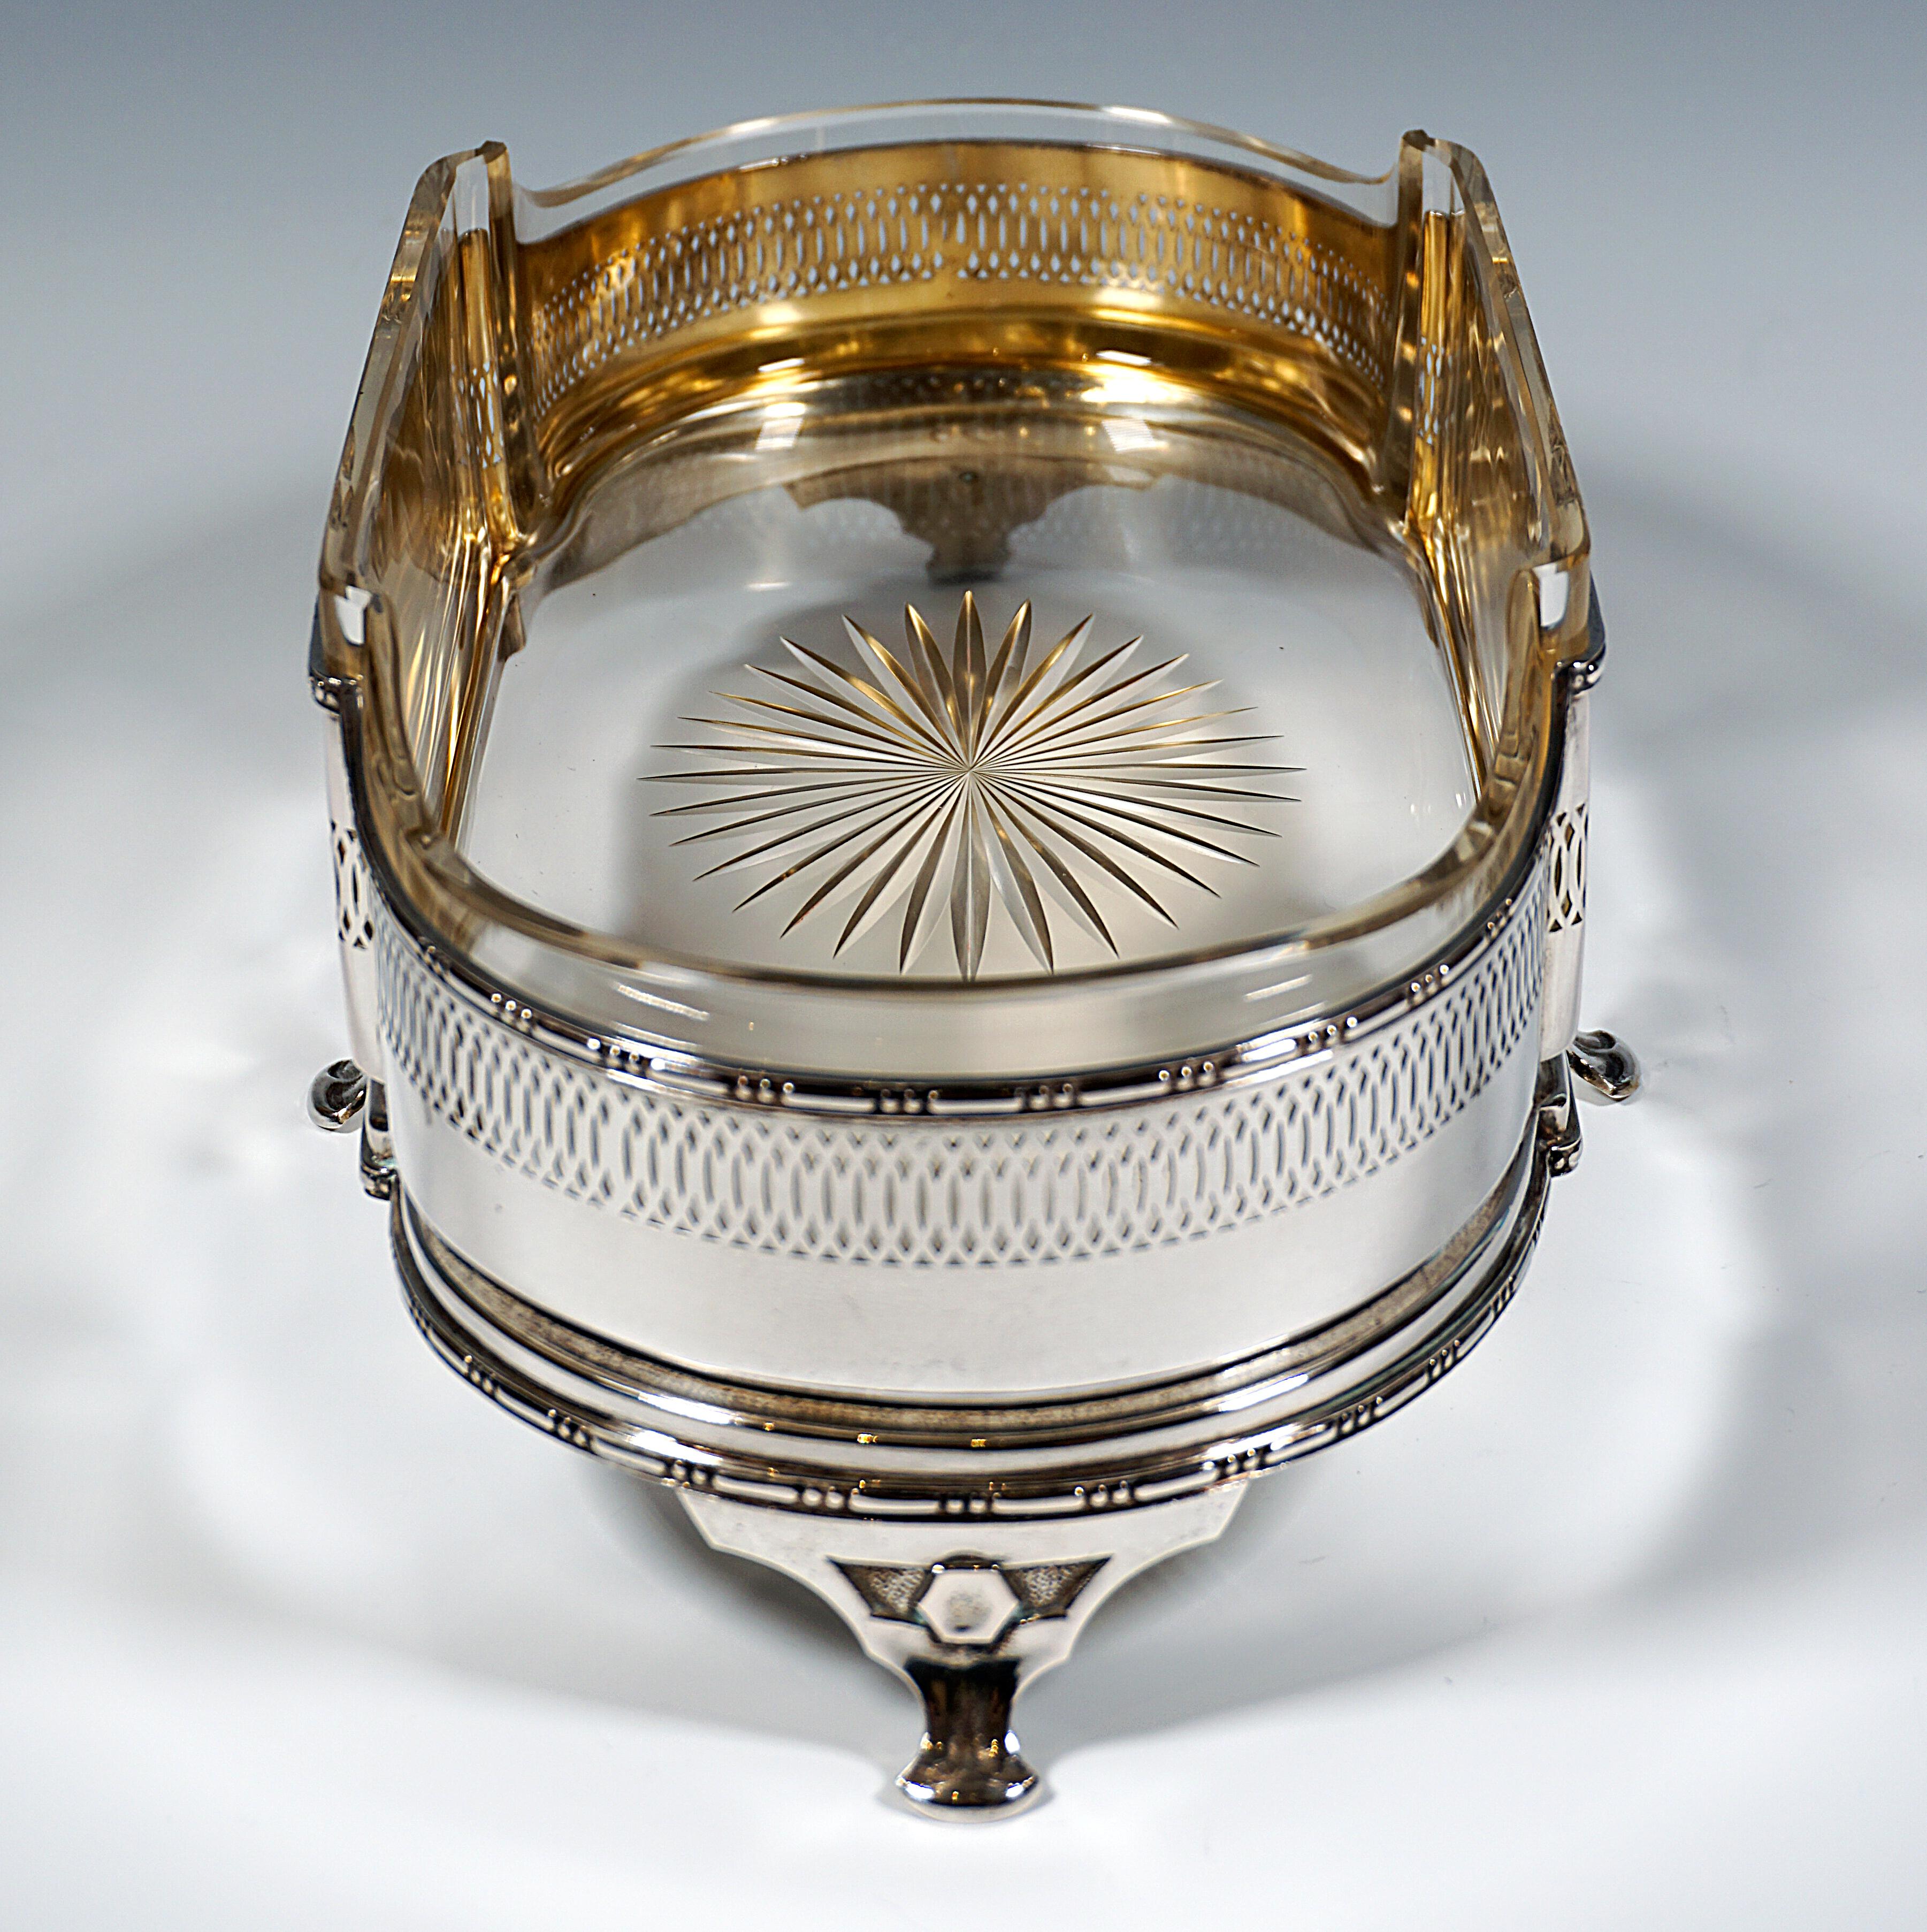 Hand-Crafted Art Nouveau Silver Centerpiece, Jardinière With Glass Insert, Vienna Circa 1900 For Sale